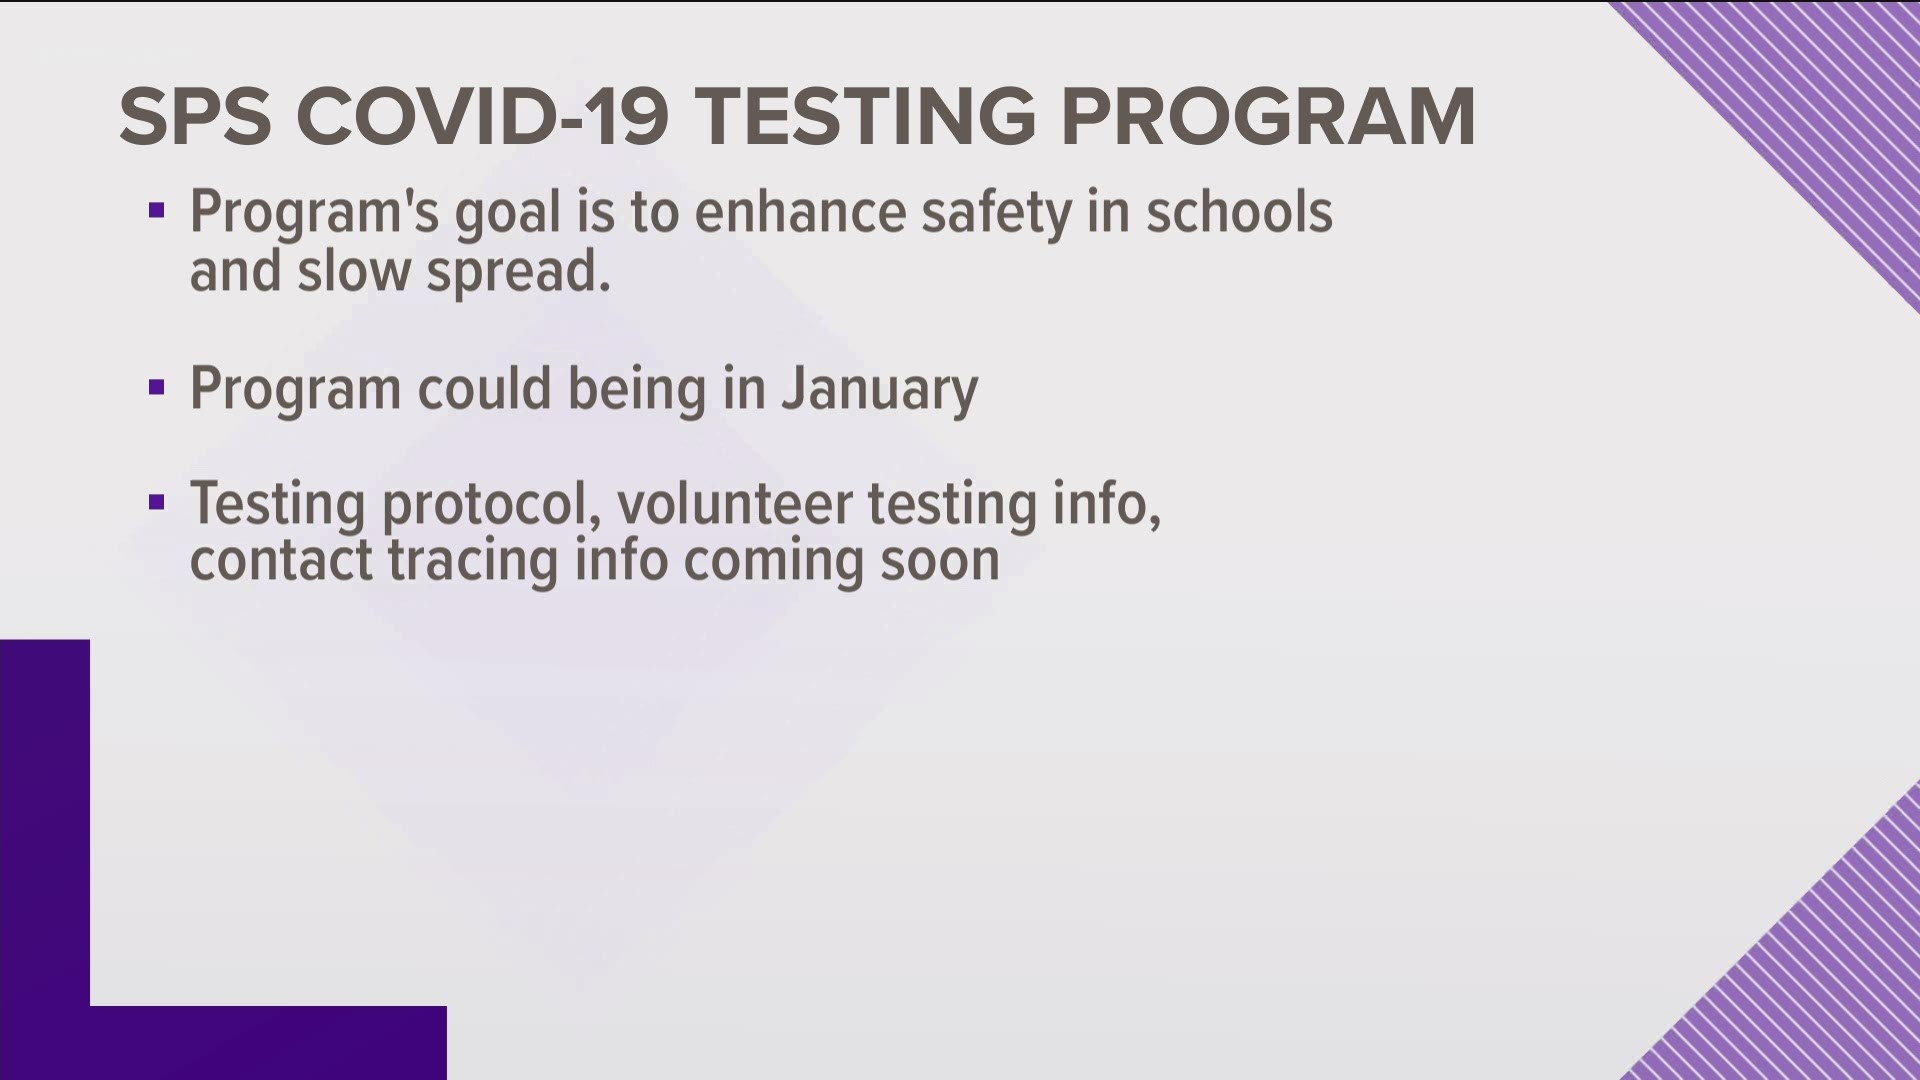 The program funded by Washington state offers voluntary COVID-19 screening and testing for SPS students and staff.